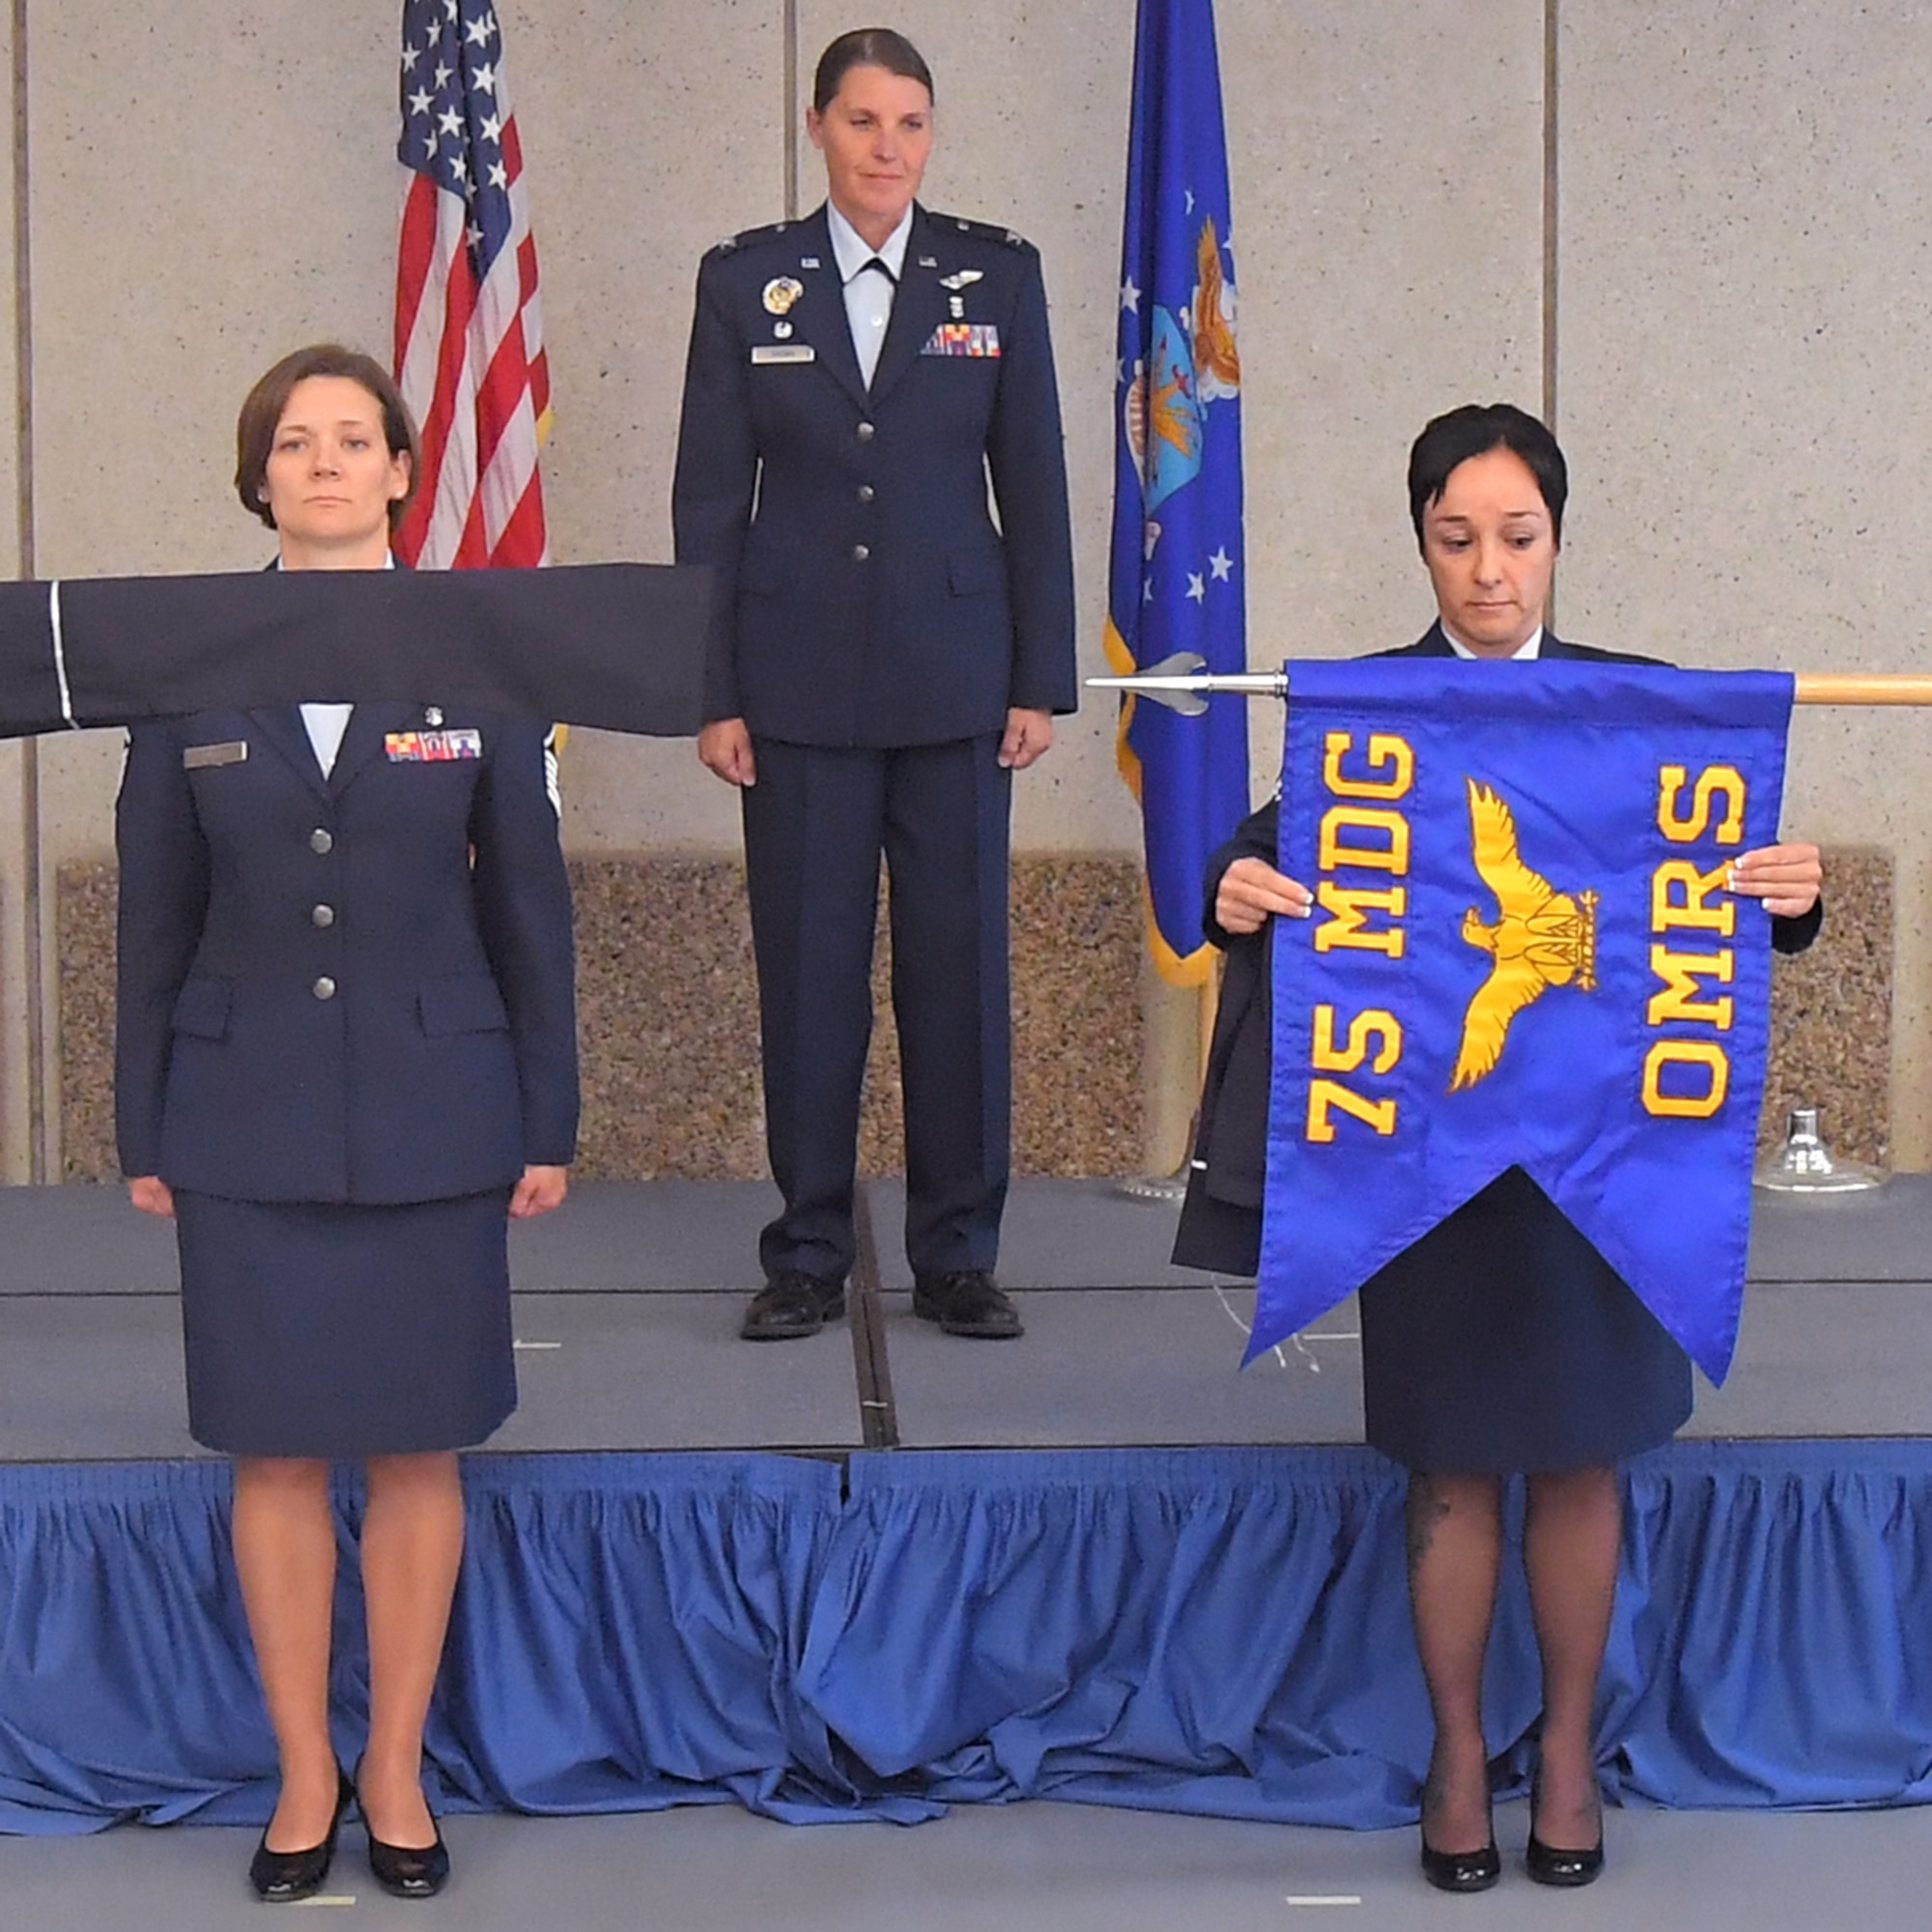 Master Sgt. Veronique Ouchana, public health flight chief, unfurls the unit’s new guidon during a squadron inactivation and redesgination ceremony July 12, 2019, at Hill Air Force Base, Utah. During the ceremony, the 75th Aerospace Medicine Squadron was inactivated and then redesignated as the 75th Operational Medical Readiness Squadron. The change is part of an Air Force initiative to improve patient care and military readiness. (U.S. Air Force photo by U.S. Air Force photo by Todd Cromar)